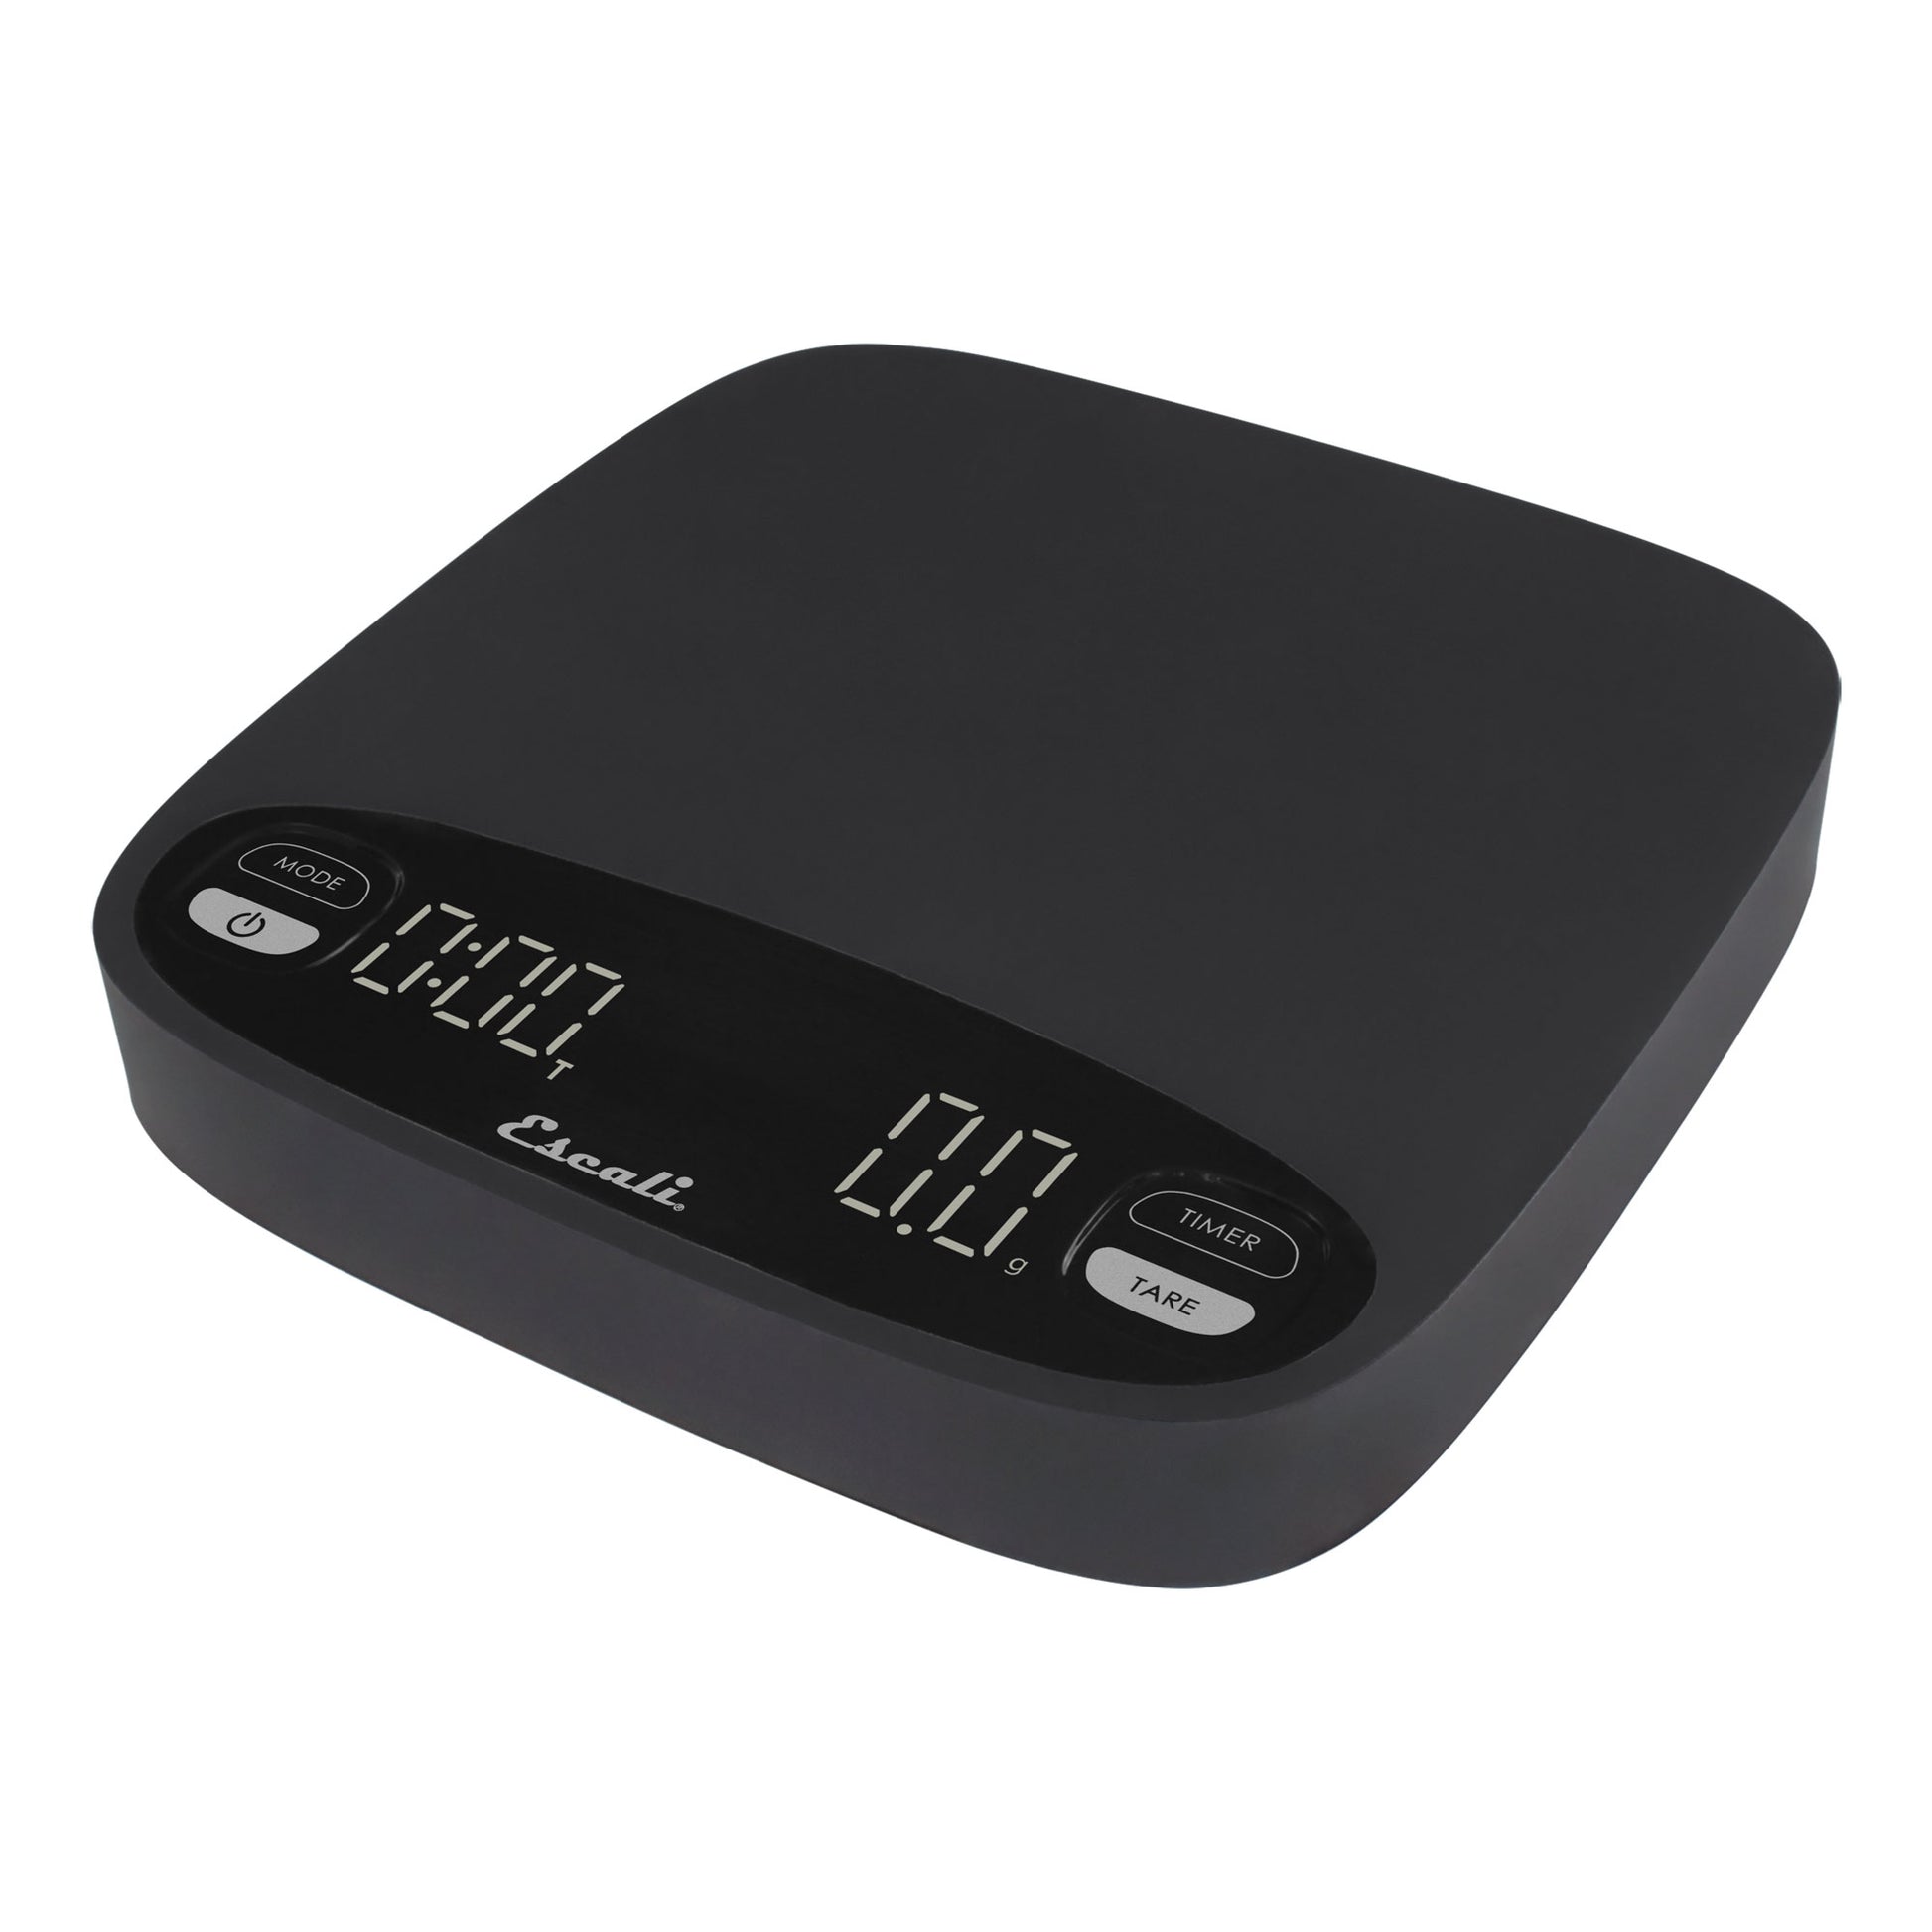 Versi Digital Coffee Scale with Timer – KitchenSupply